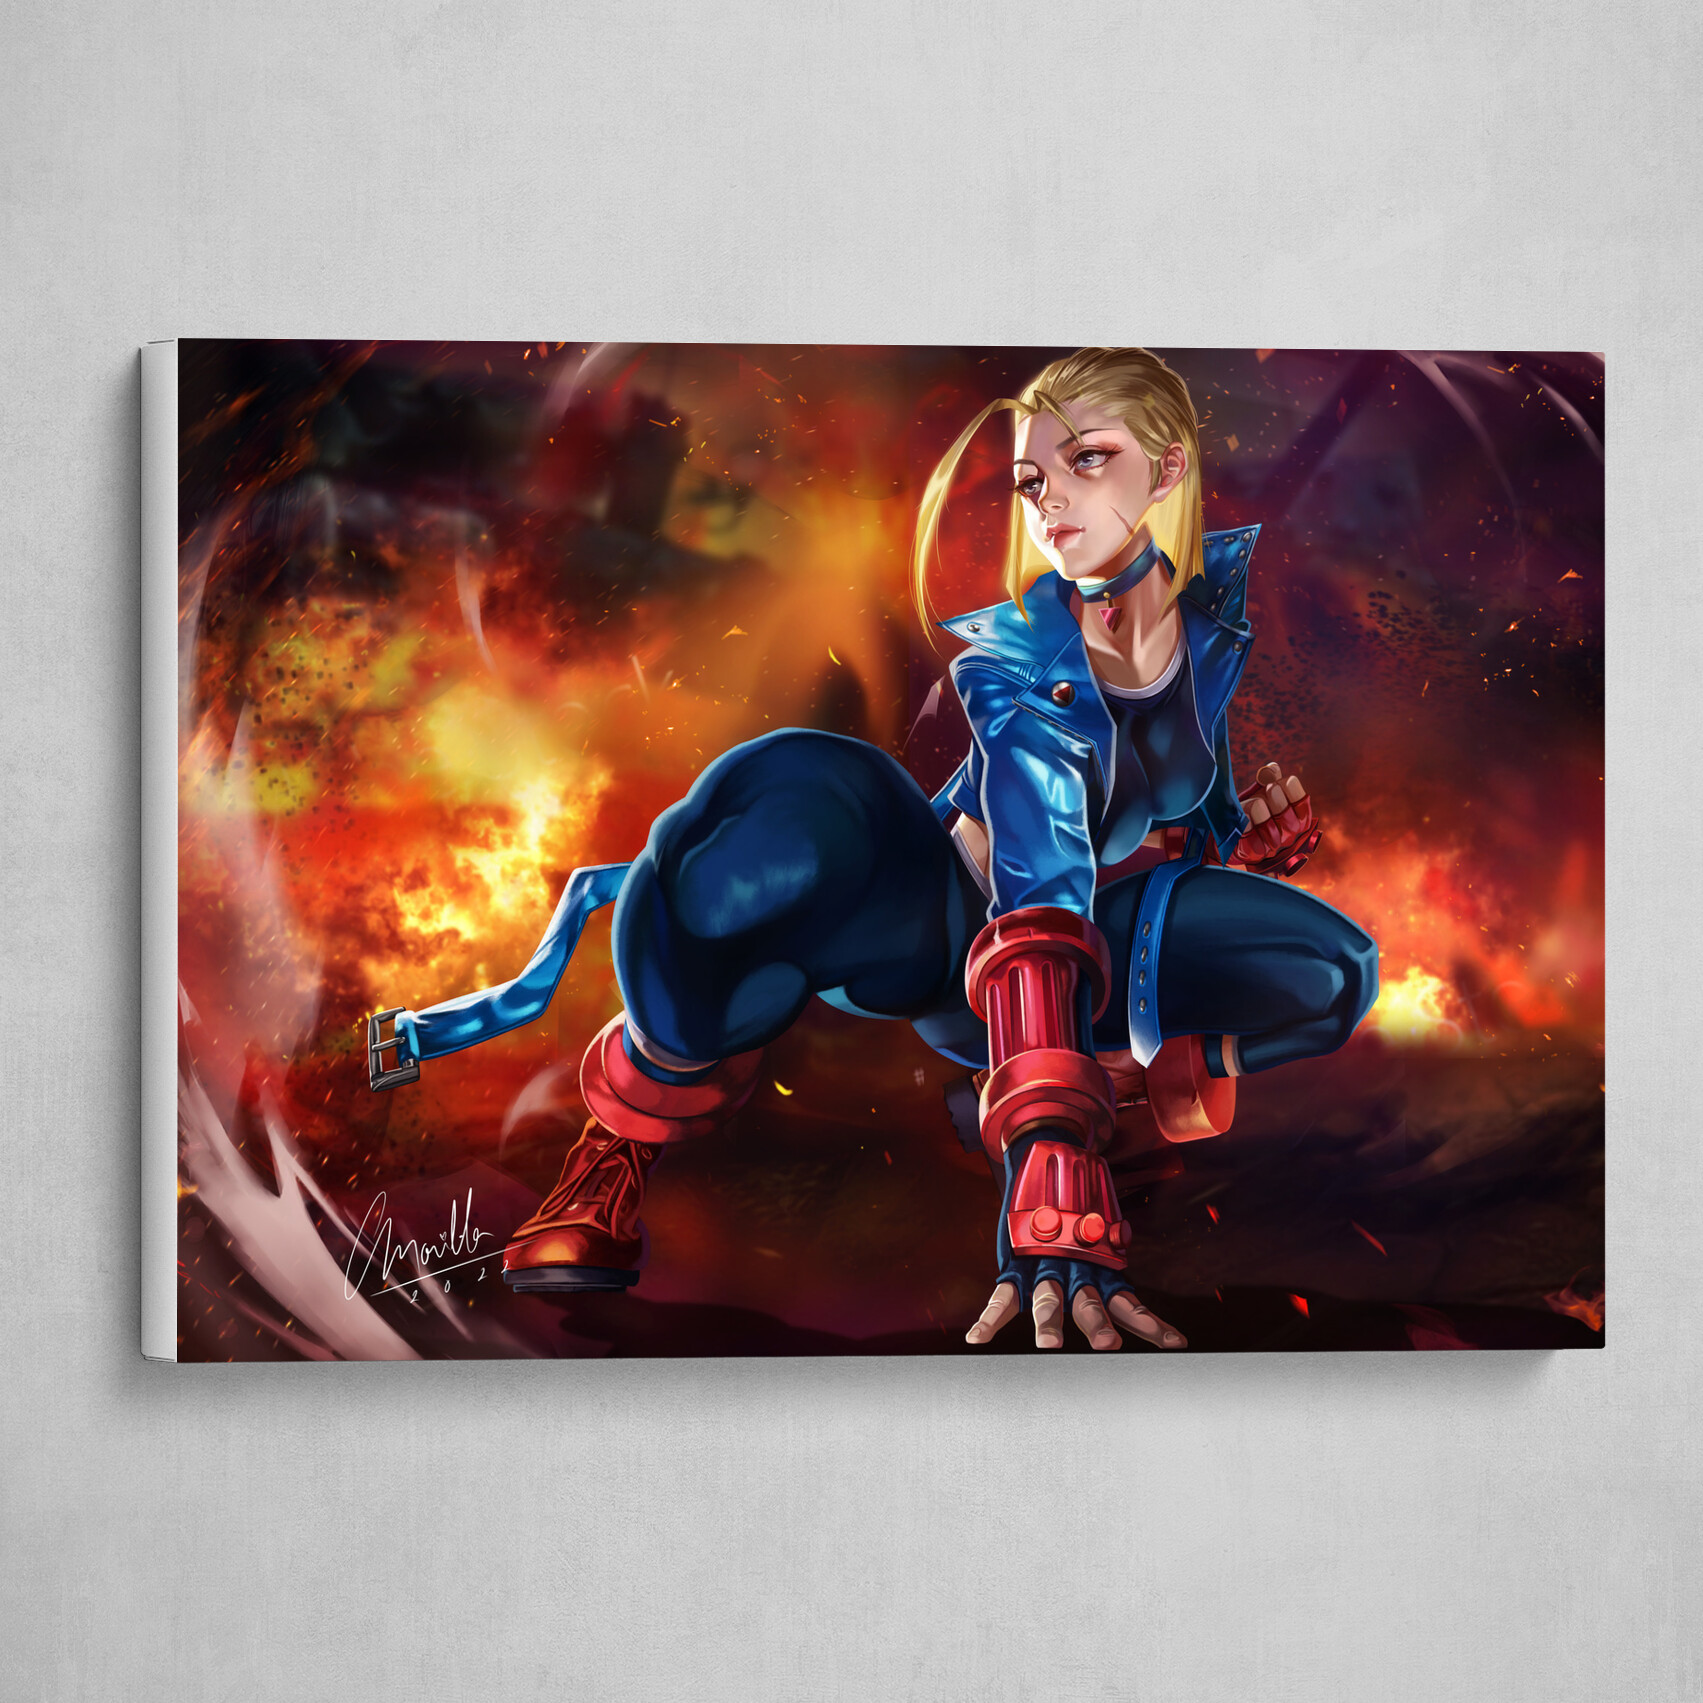 Cammy Street Fighter 2 Canvas Wrap Wall Art Game Room 